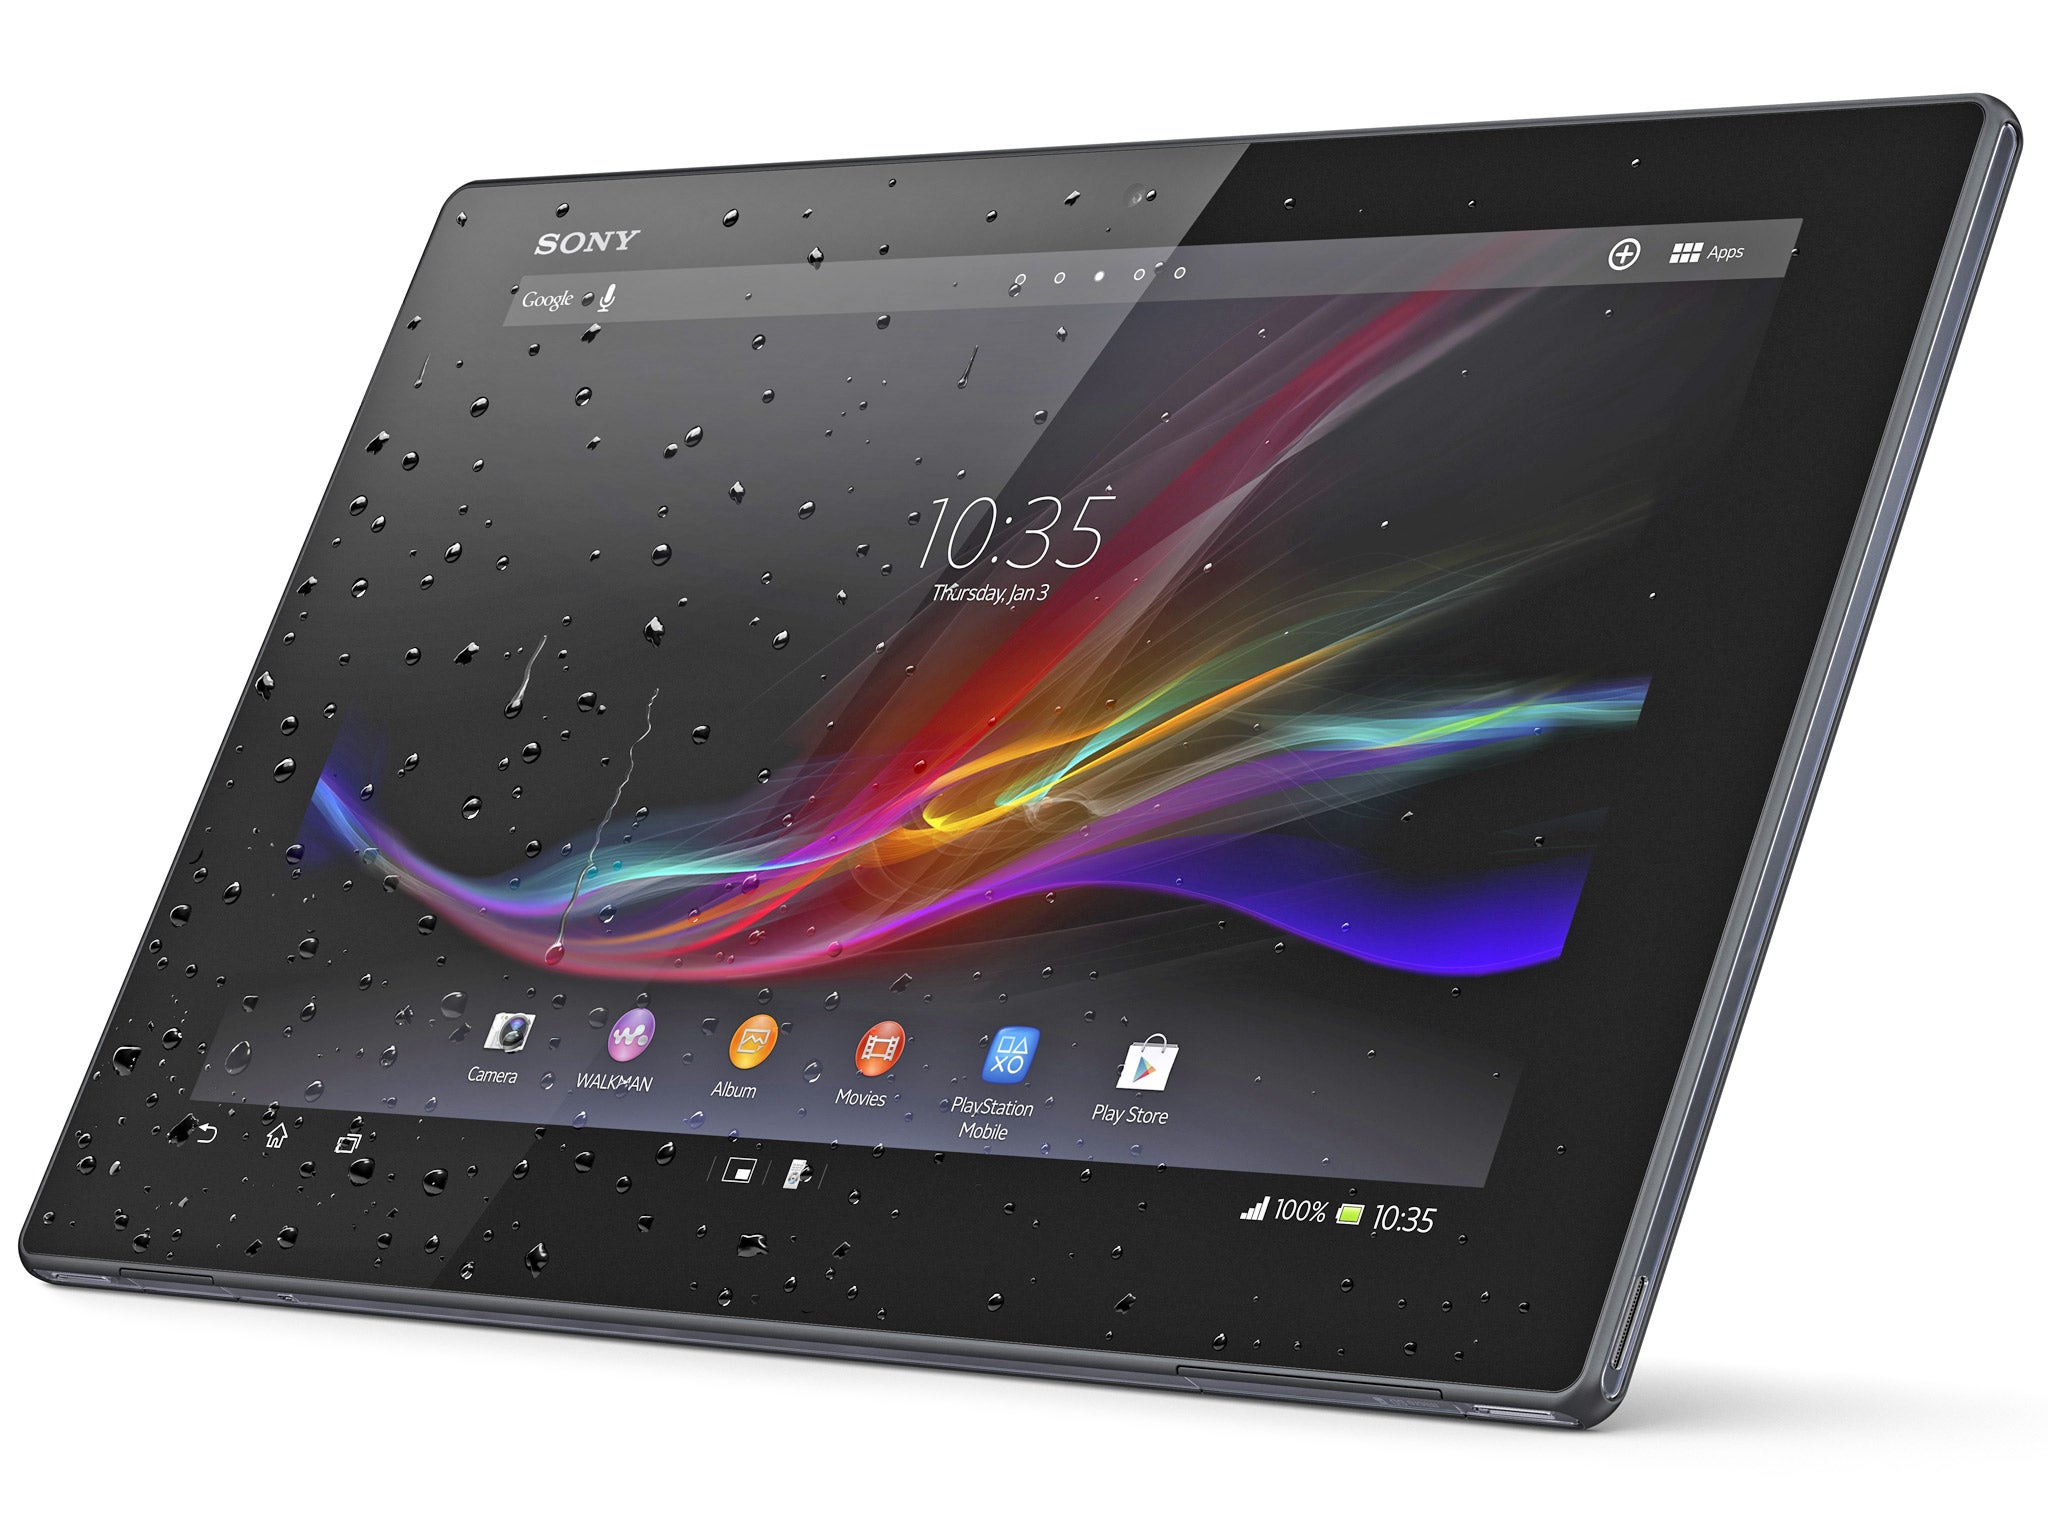 Slick and striking: the Sony Xperia Tablet Z